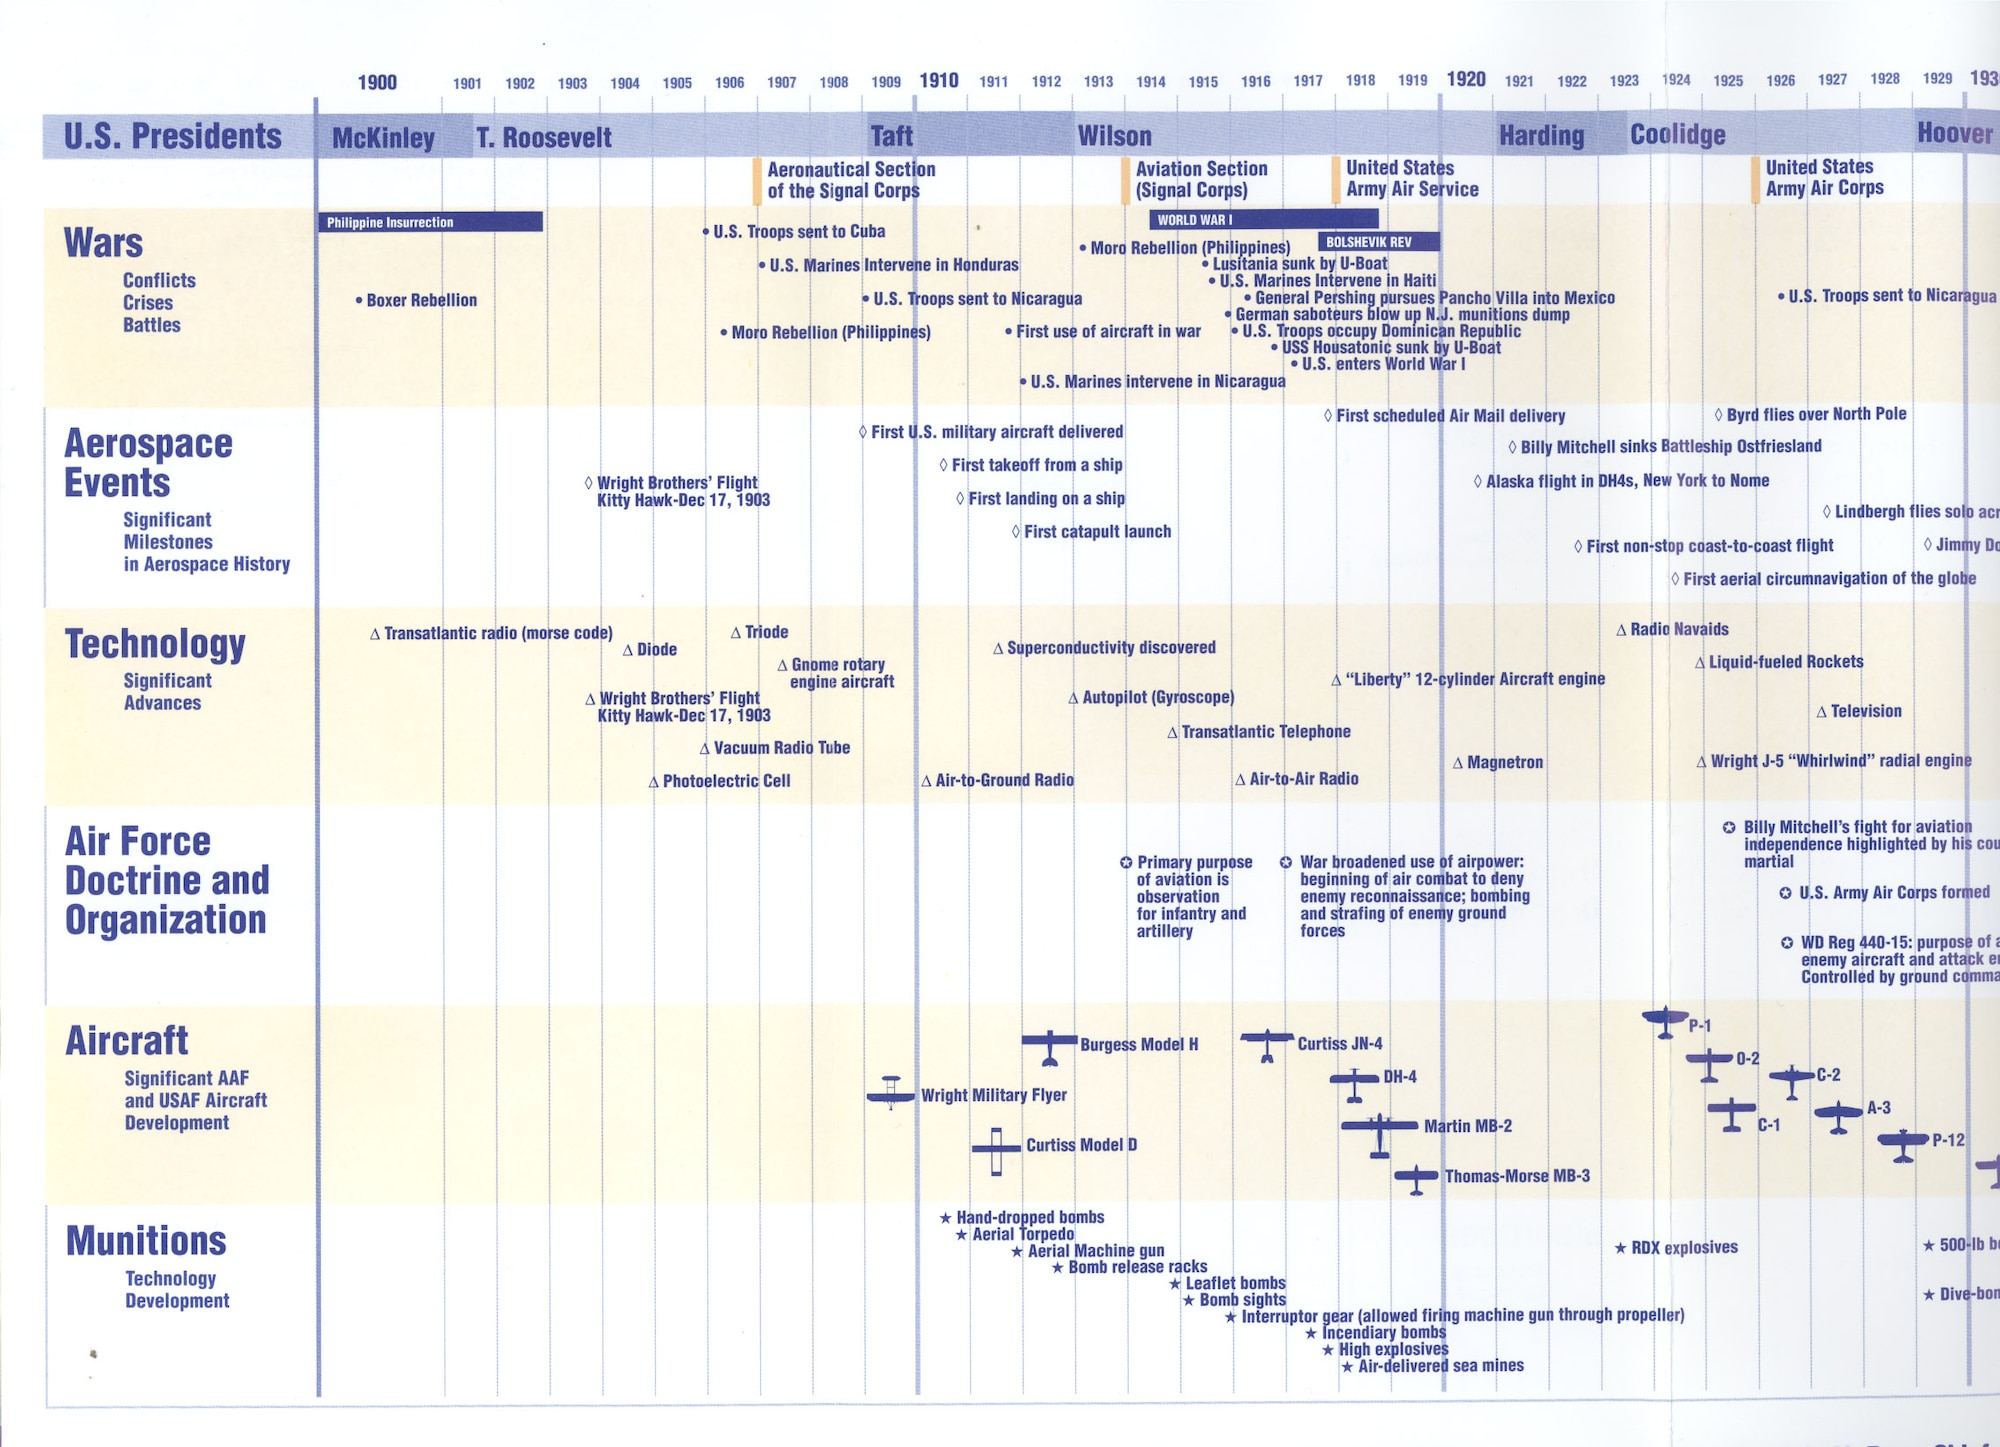 Graphical representation of the early years in the signal corps/army air service timeline.  